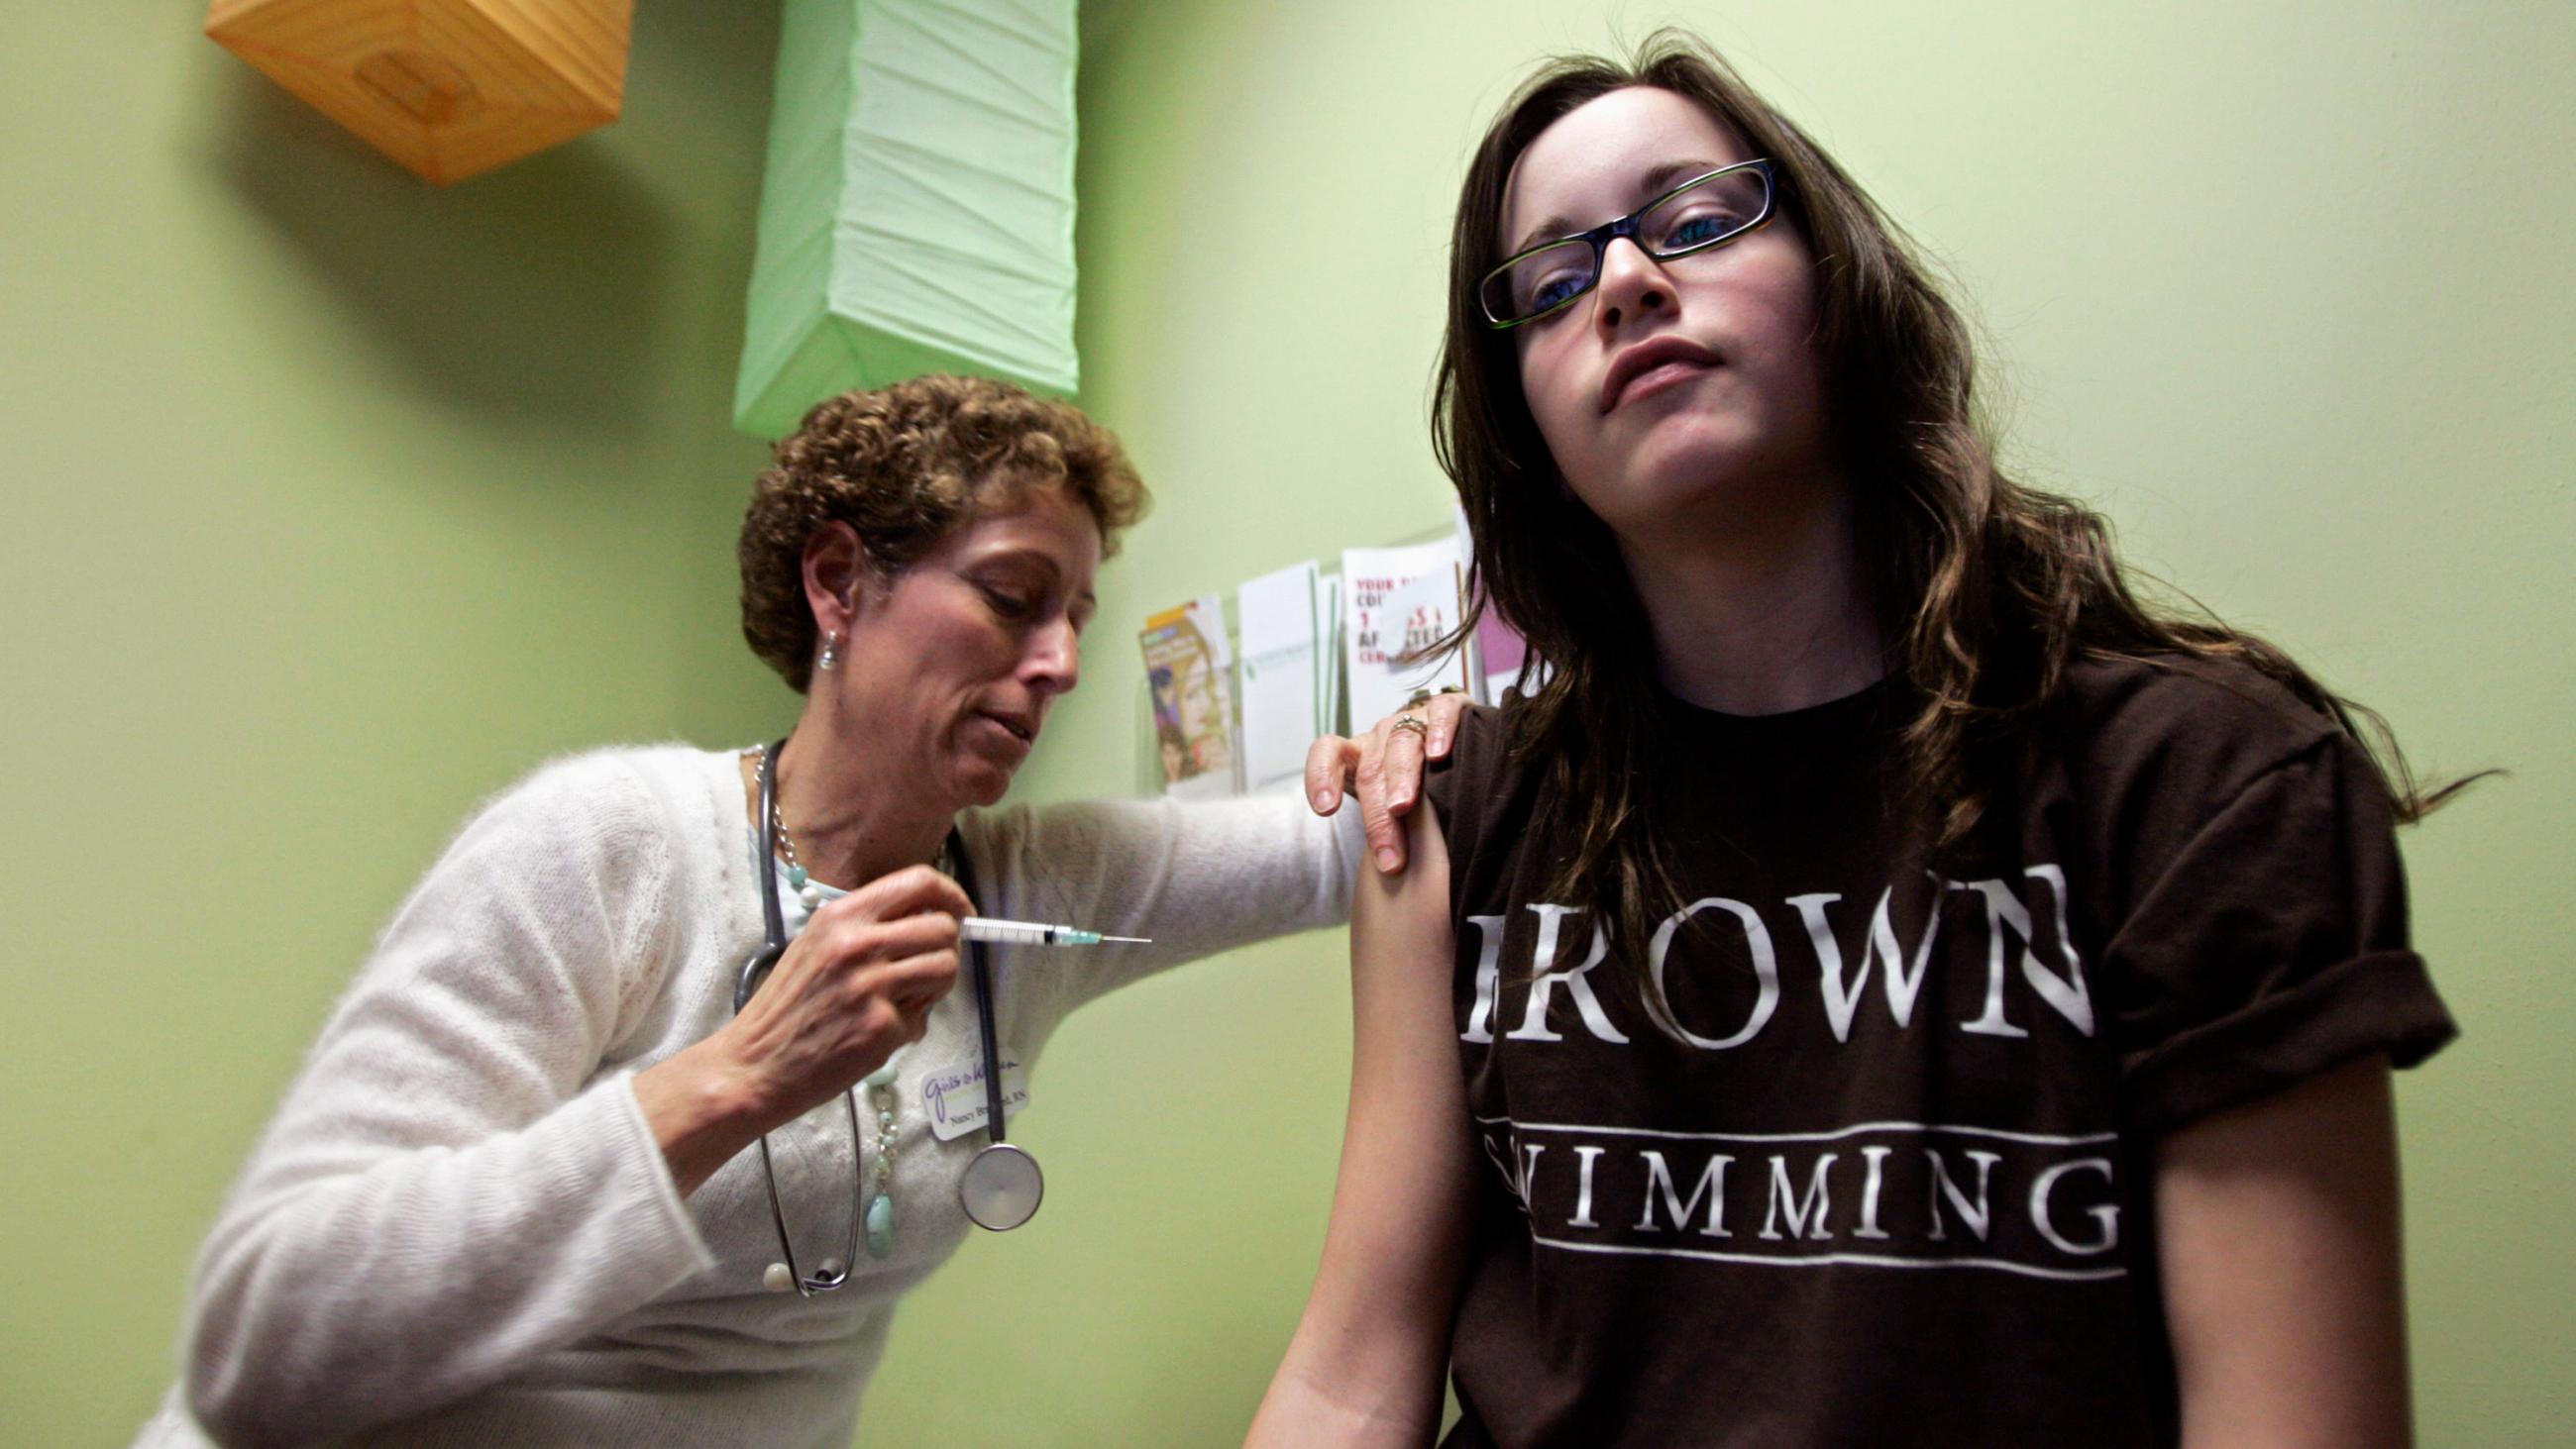 The photo shows a nurse giving a shot to a teemage girl who is looking straight at the camera. 